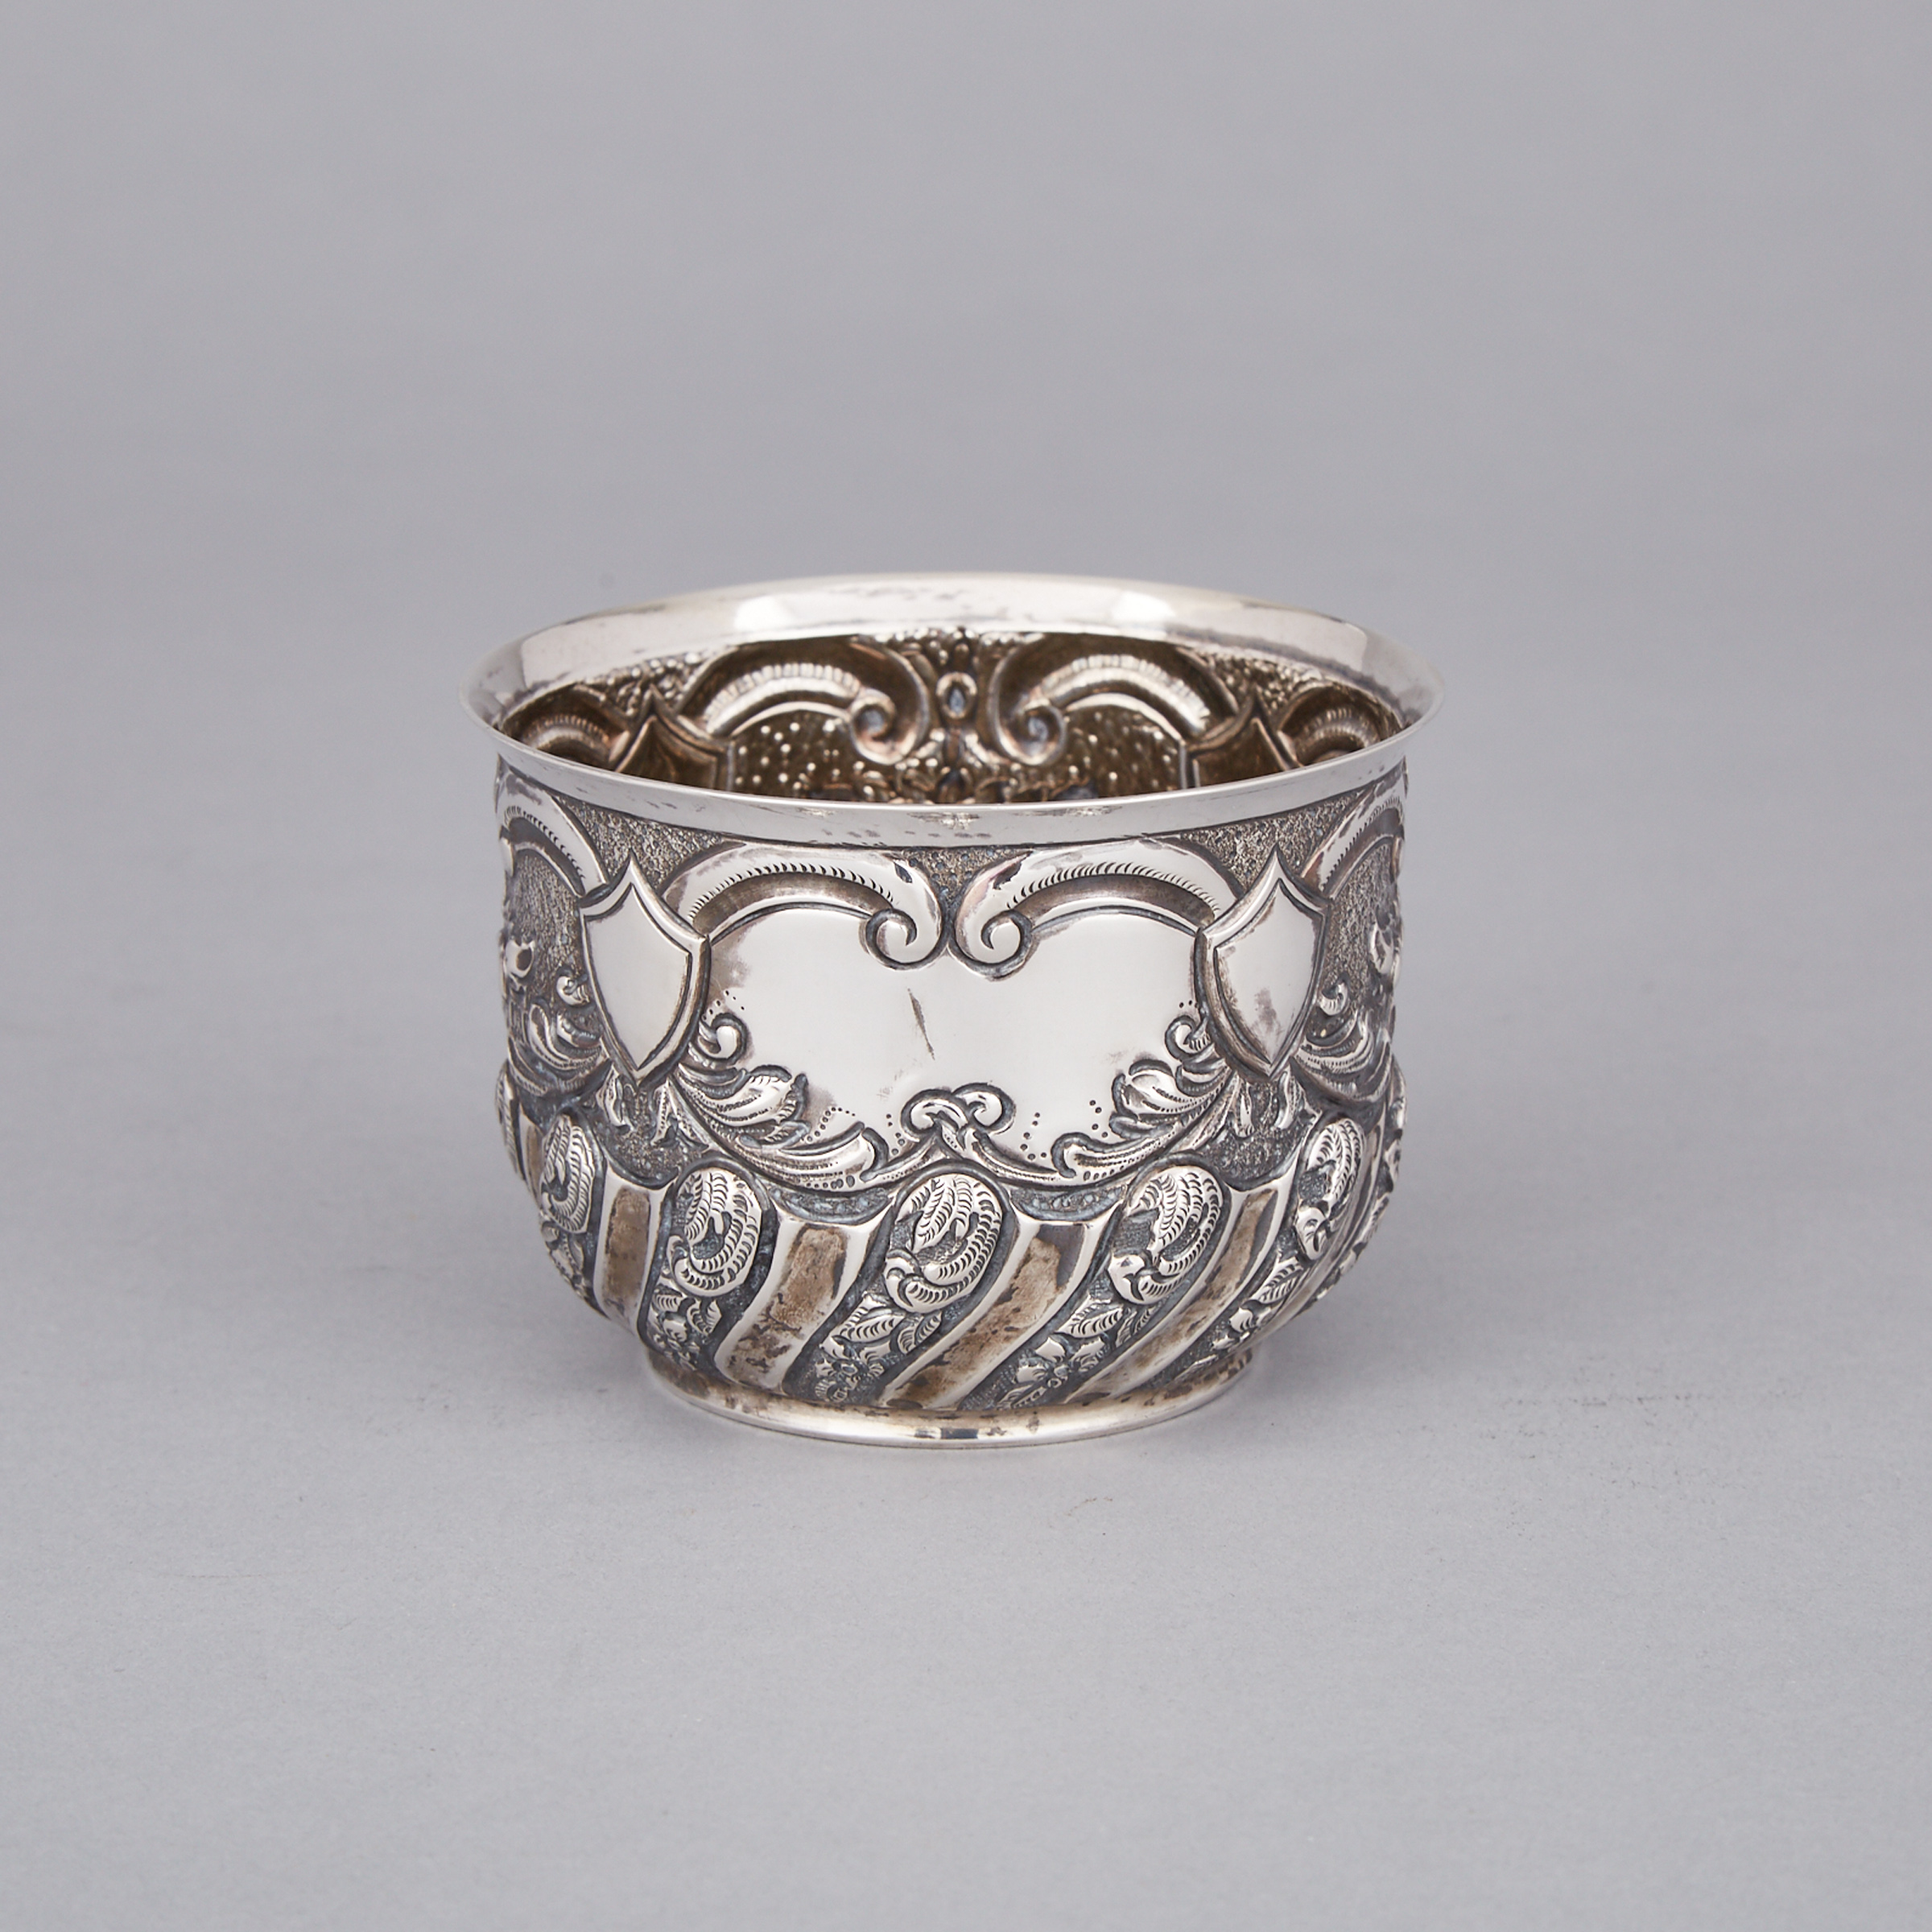 Victorian Silver Repoussé Small Bowl, James Wakely & Frank Clarke, London, 1897